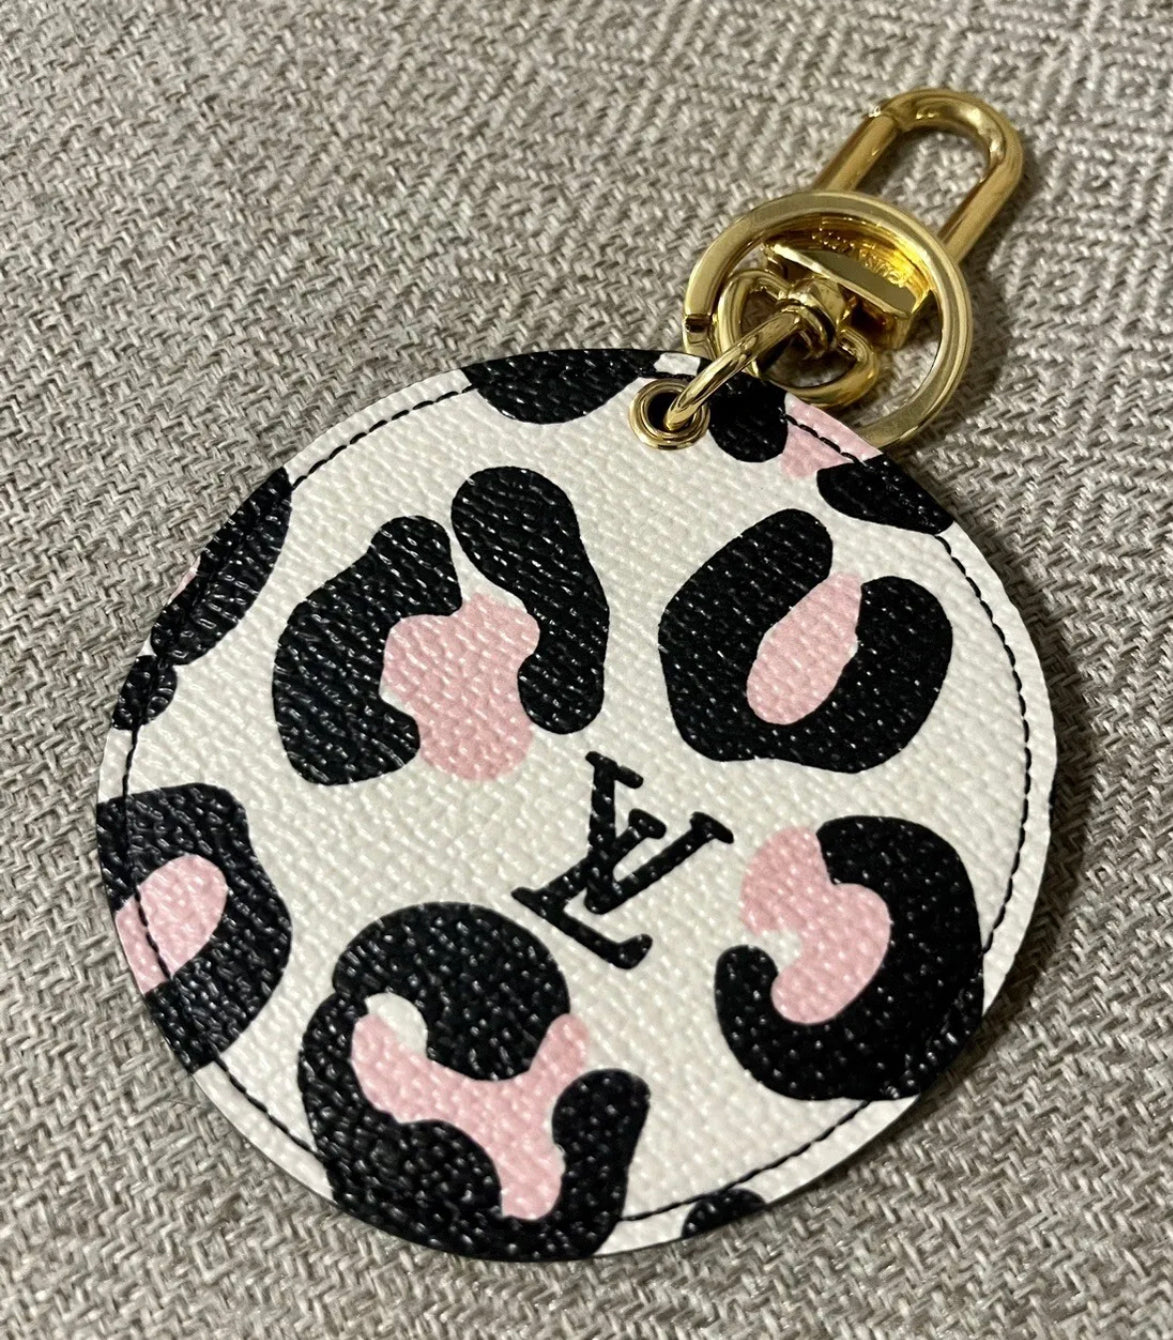 Products By Louis Vuitton: Illustre Bag Charm & Key Holder